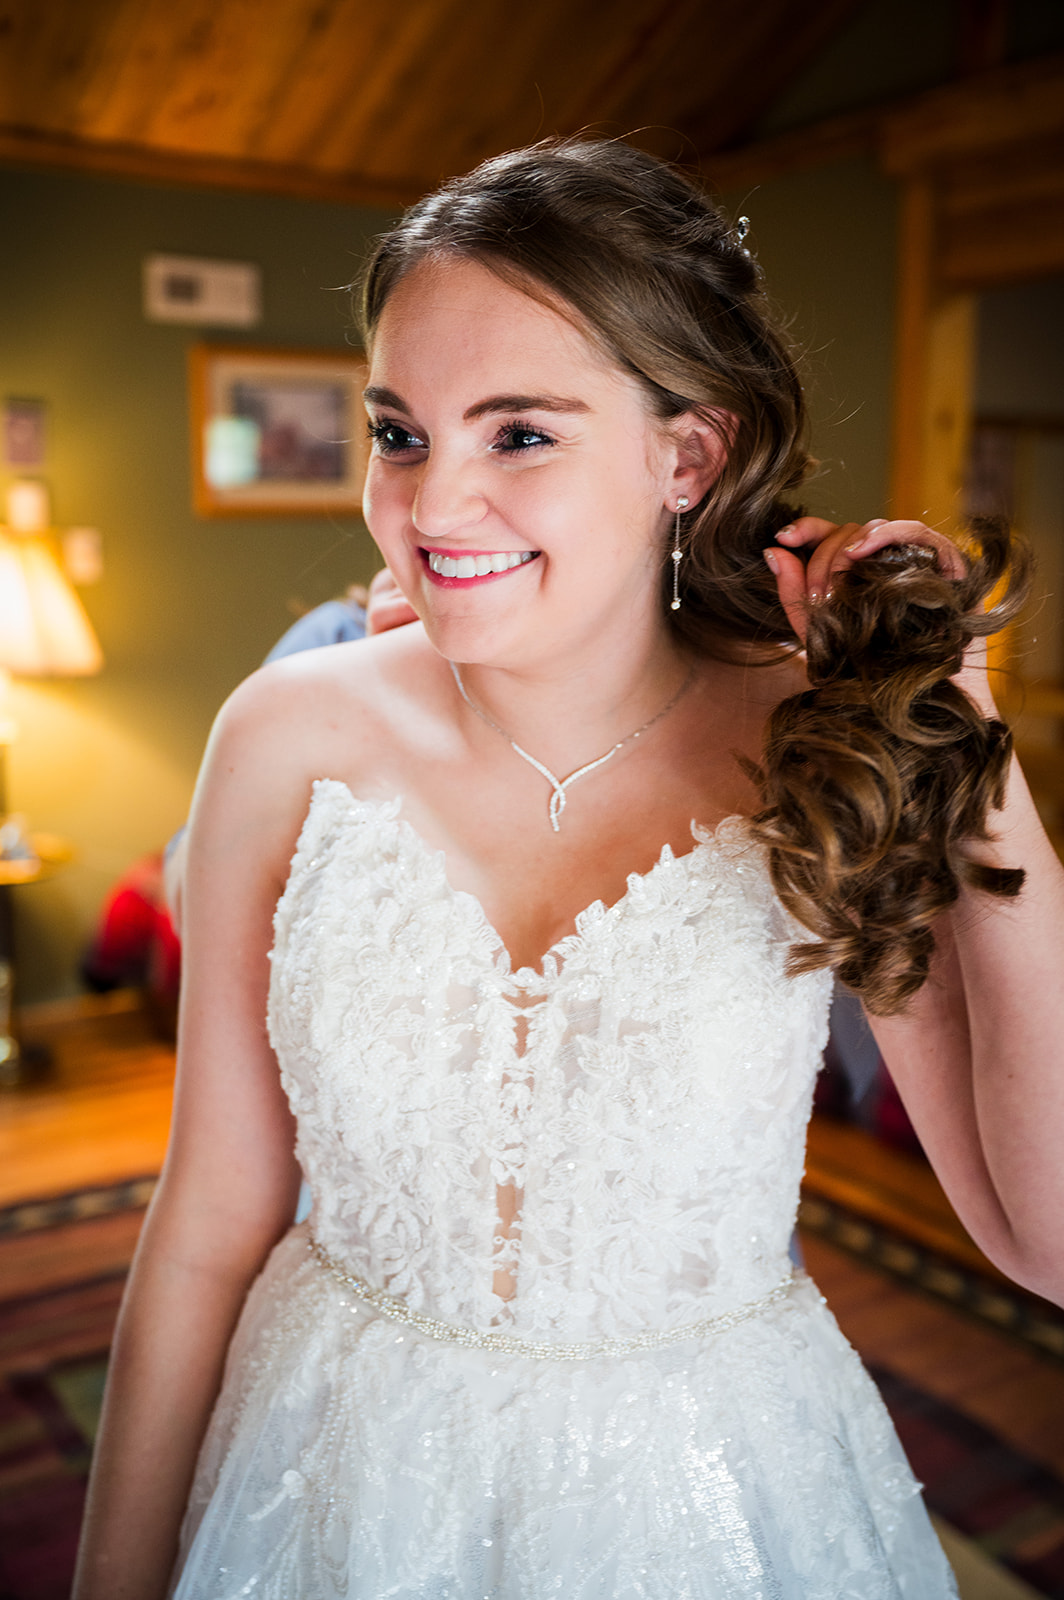 The smiling bride moves her hair so her mother can fasten her necklace.